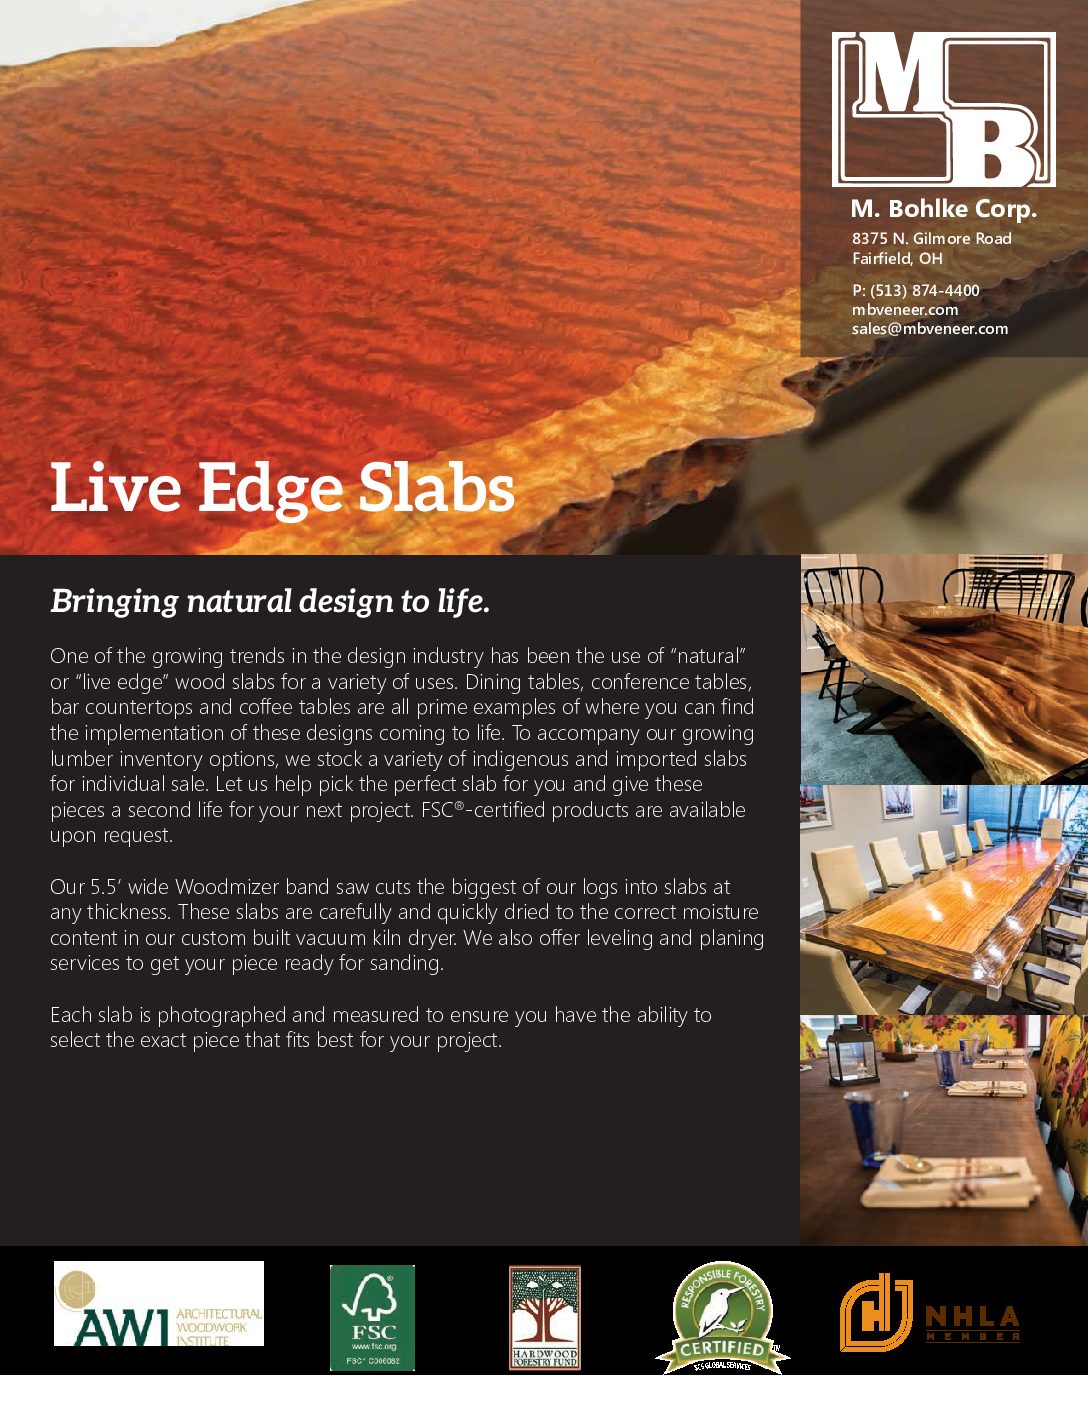 Live Edge and Lumber Services Bohlke Flier.